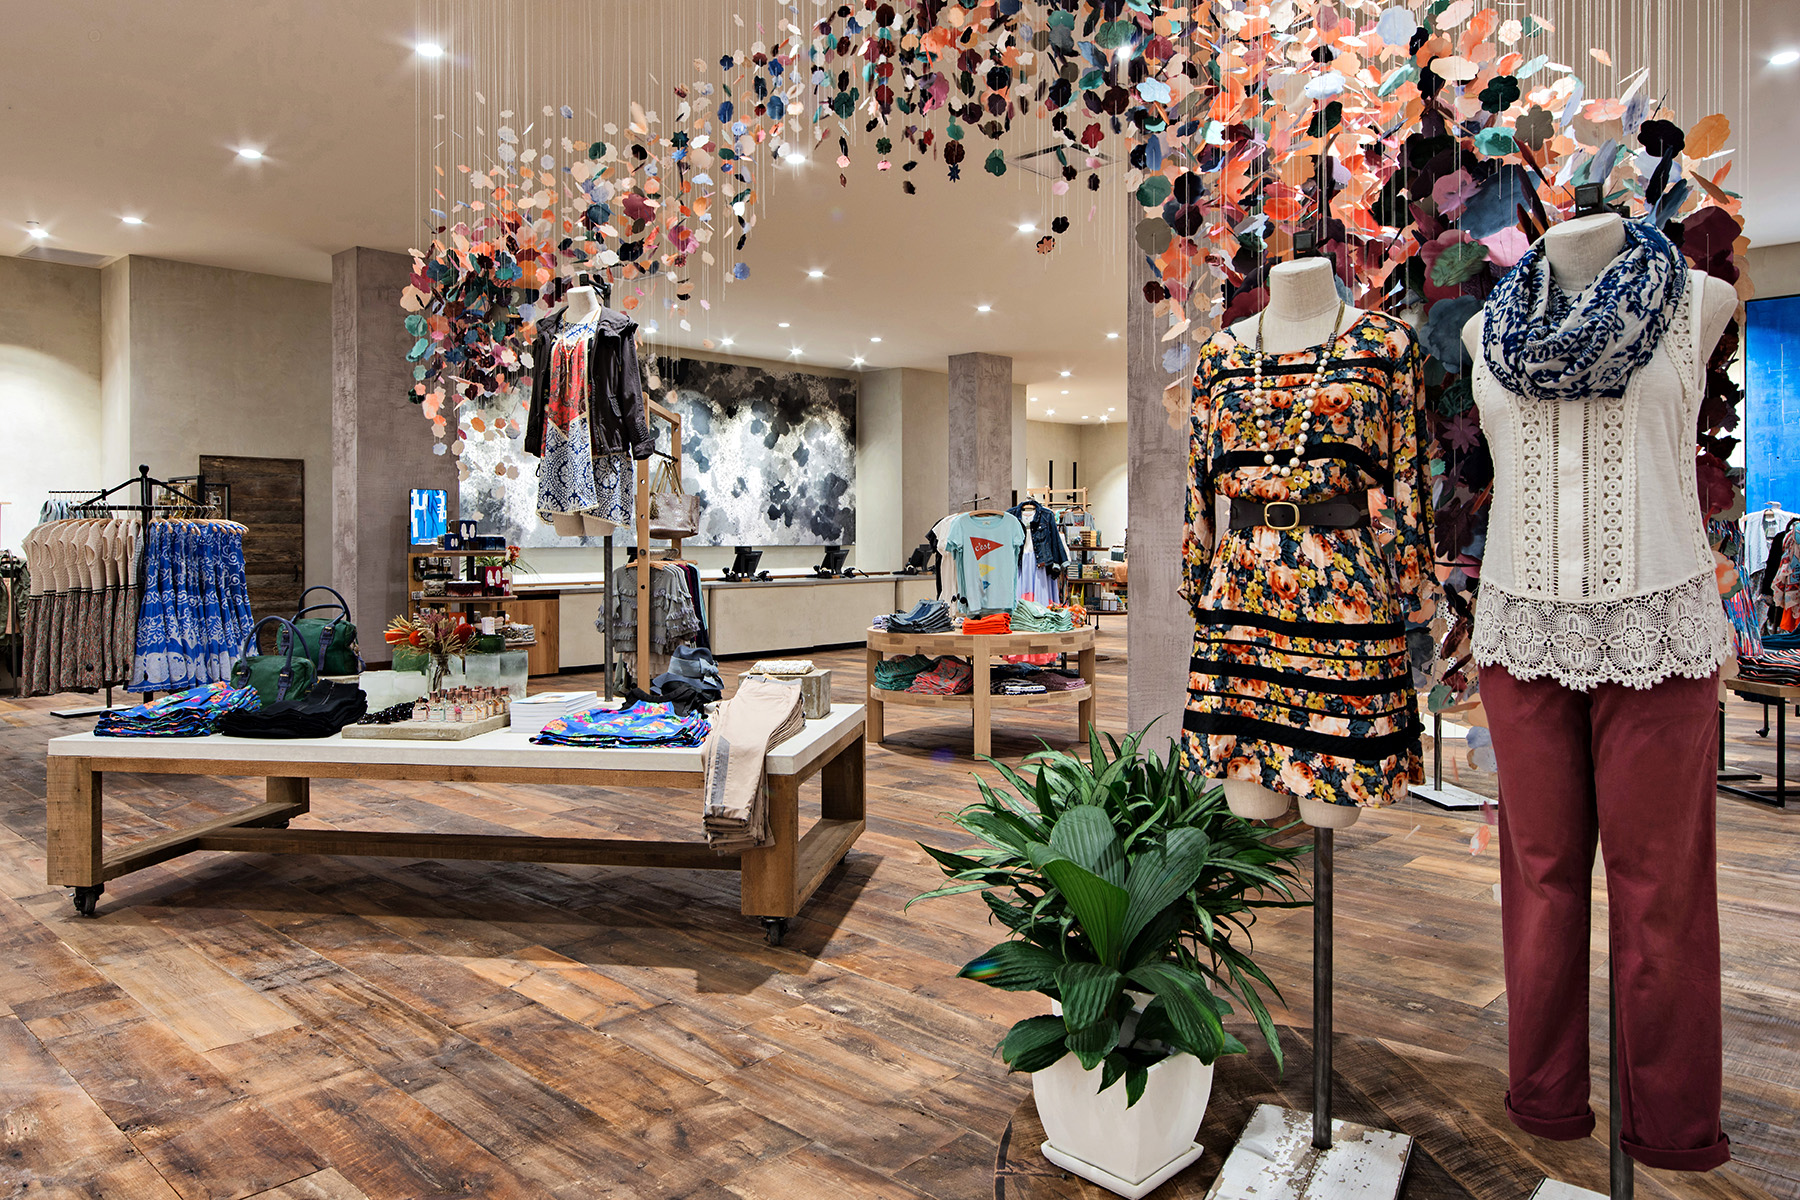 Anthropologie stores have a low density, emphasizing design elements that support the creative clothing and housewares brand.